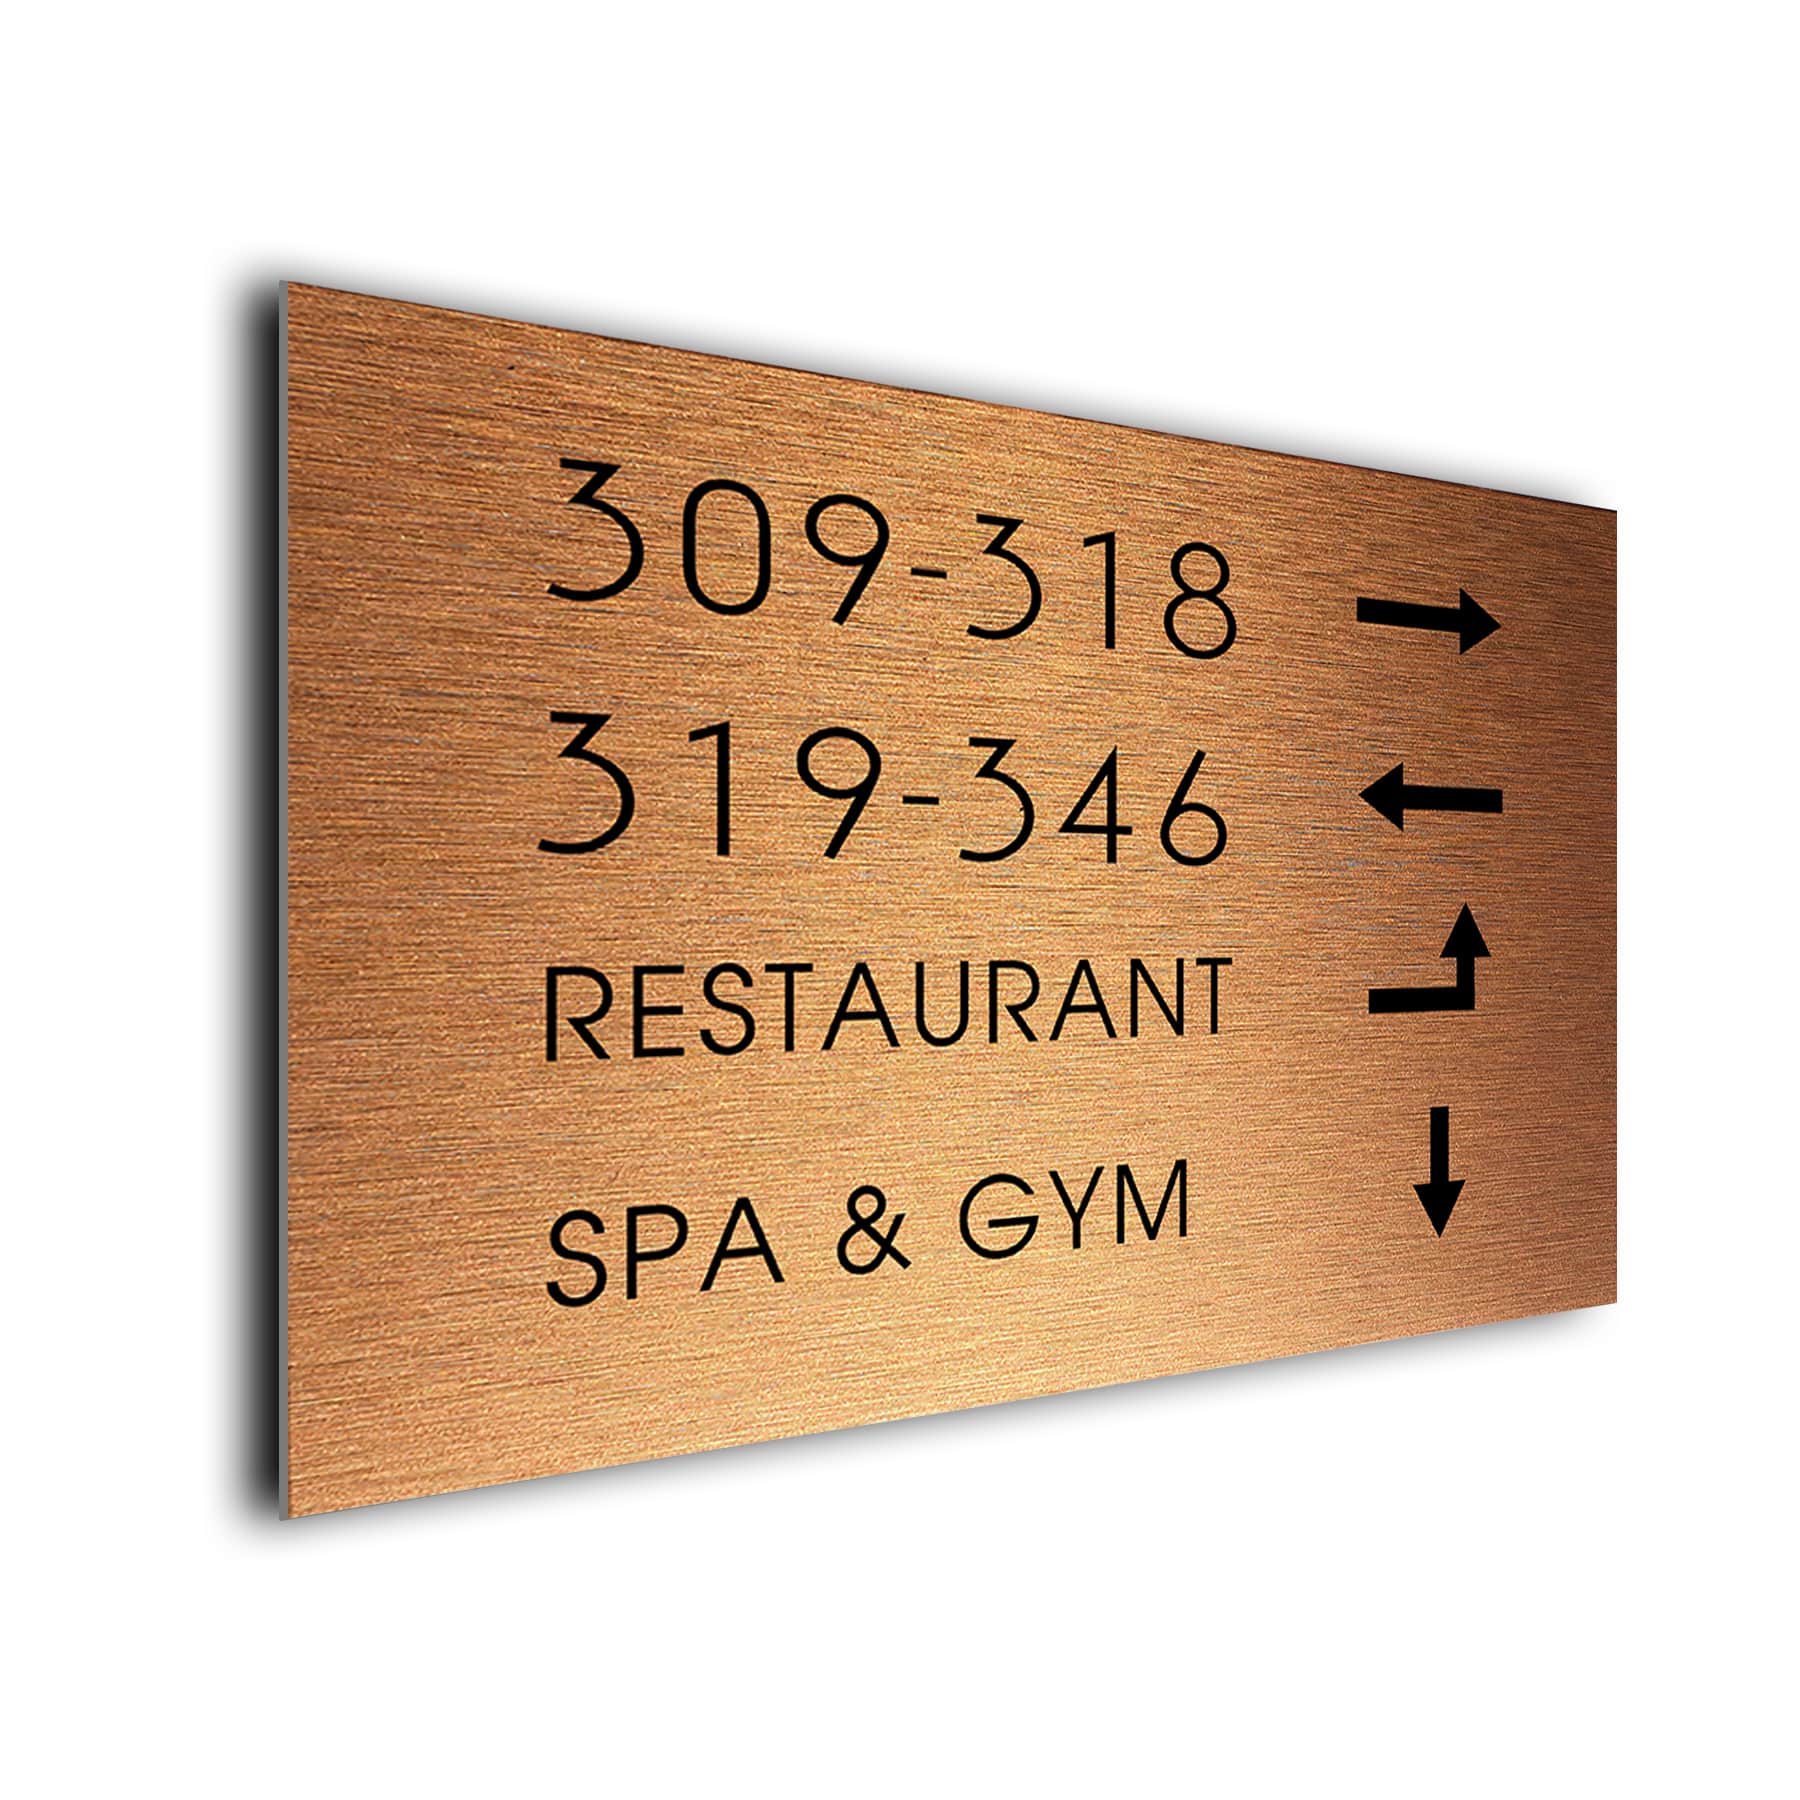 Personalized directory signs